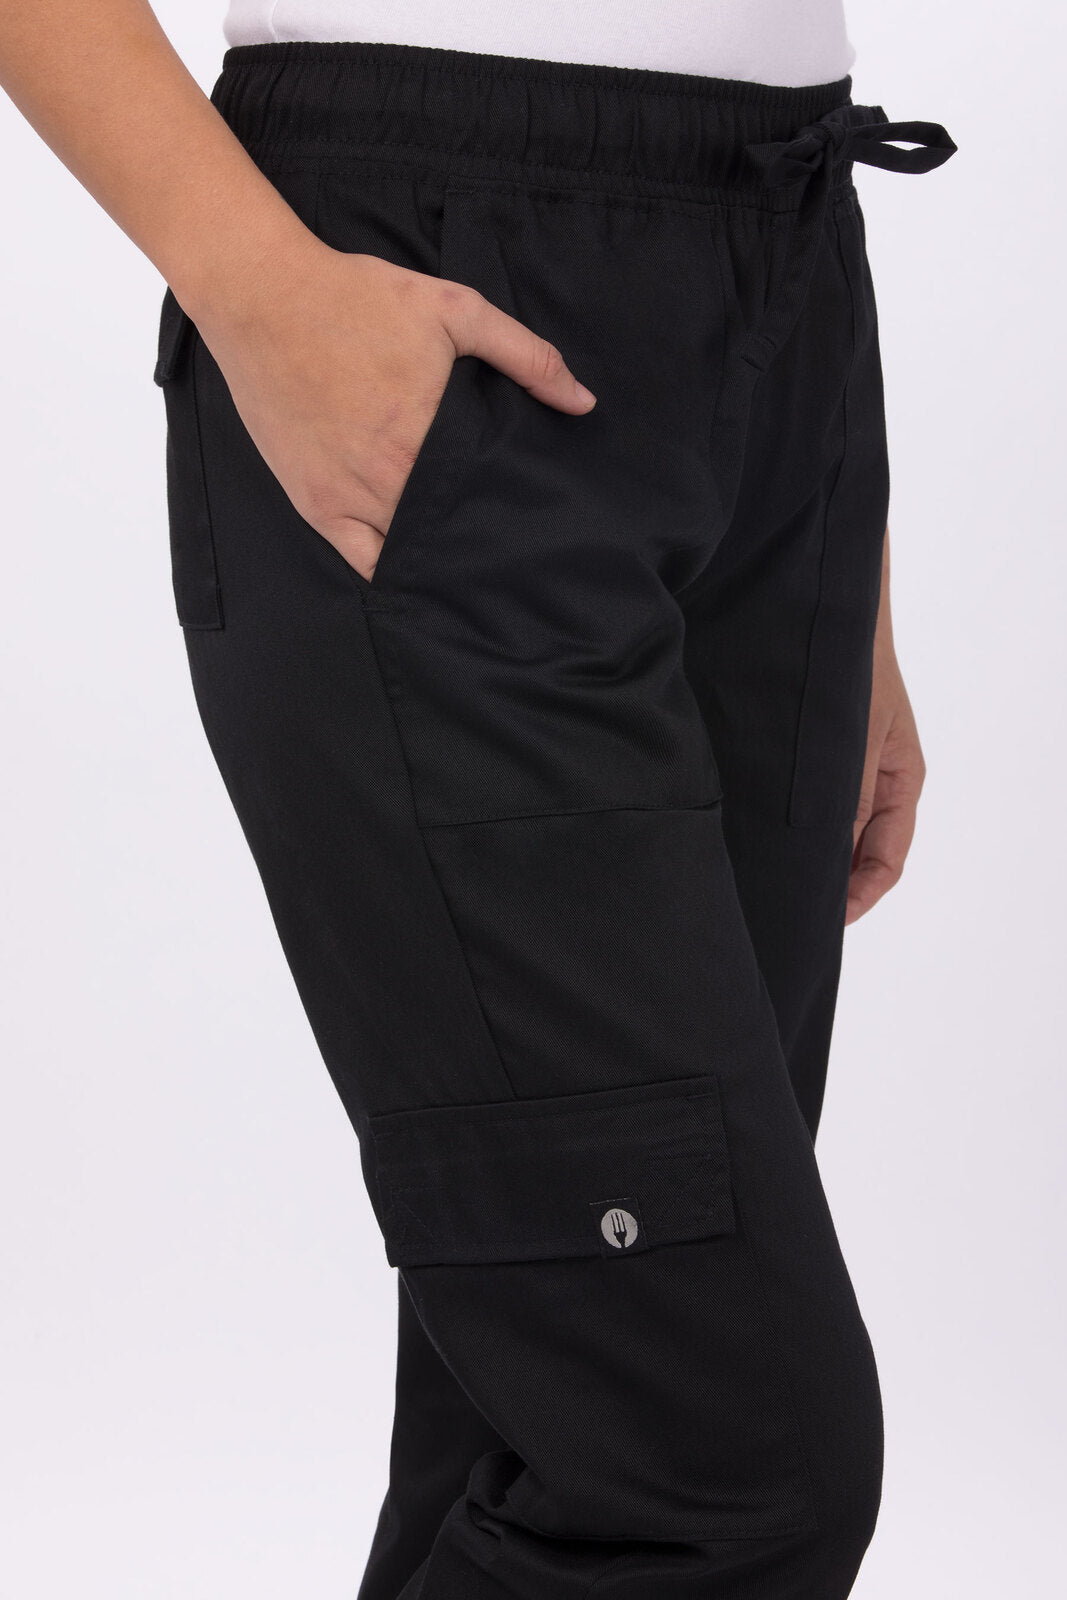 Chef Works - Cargo Chef Pants